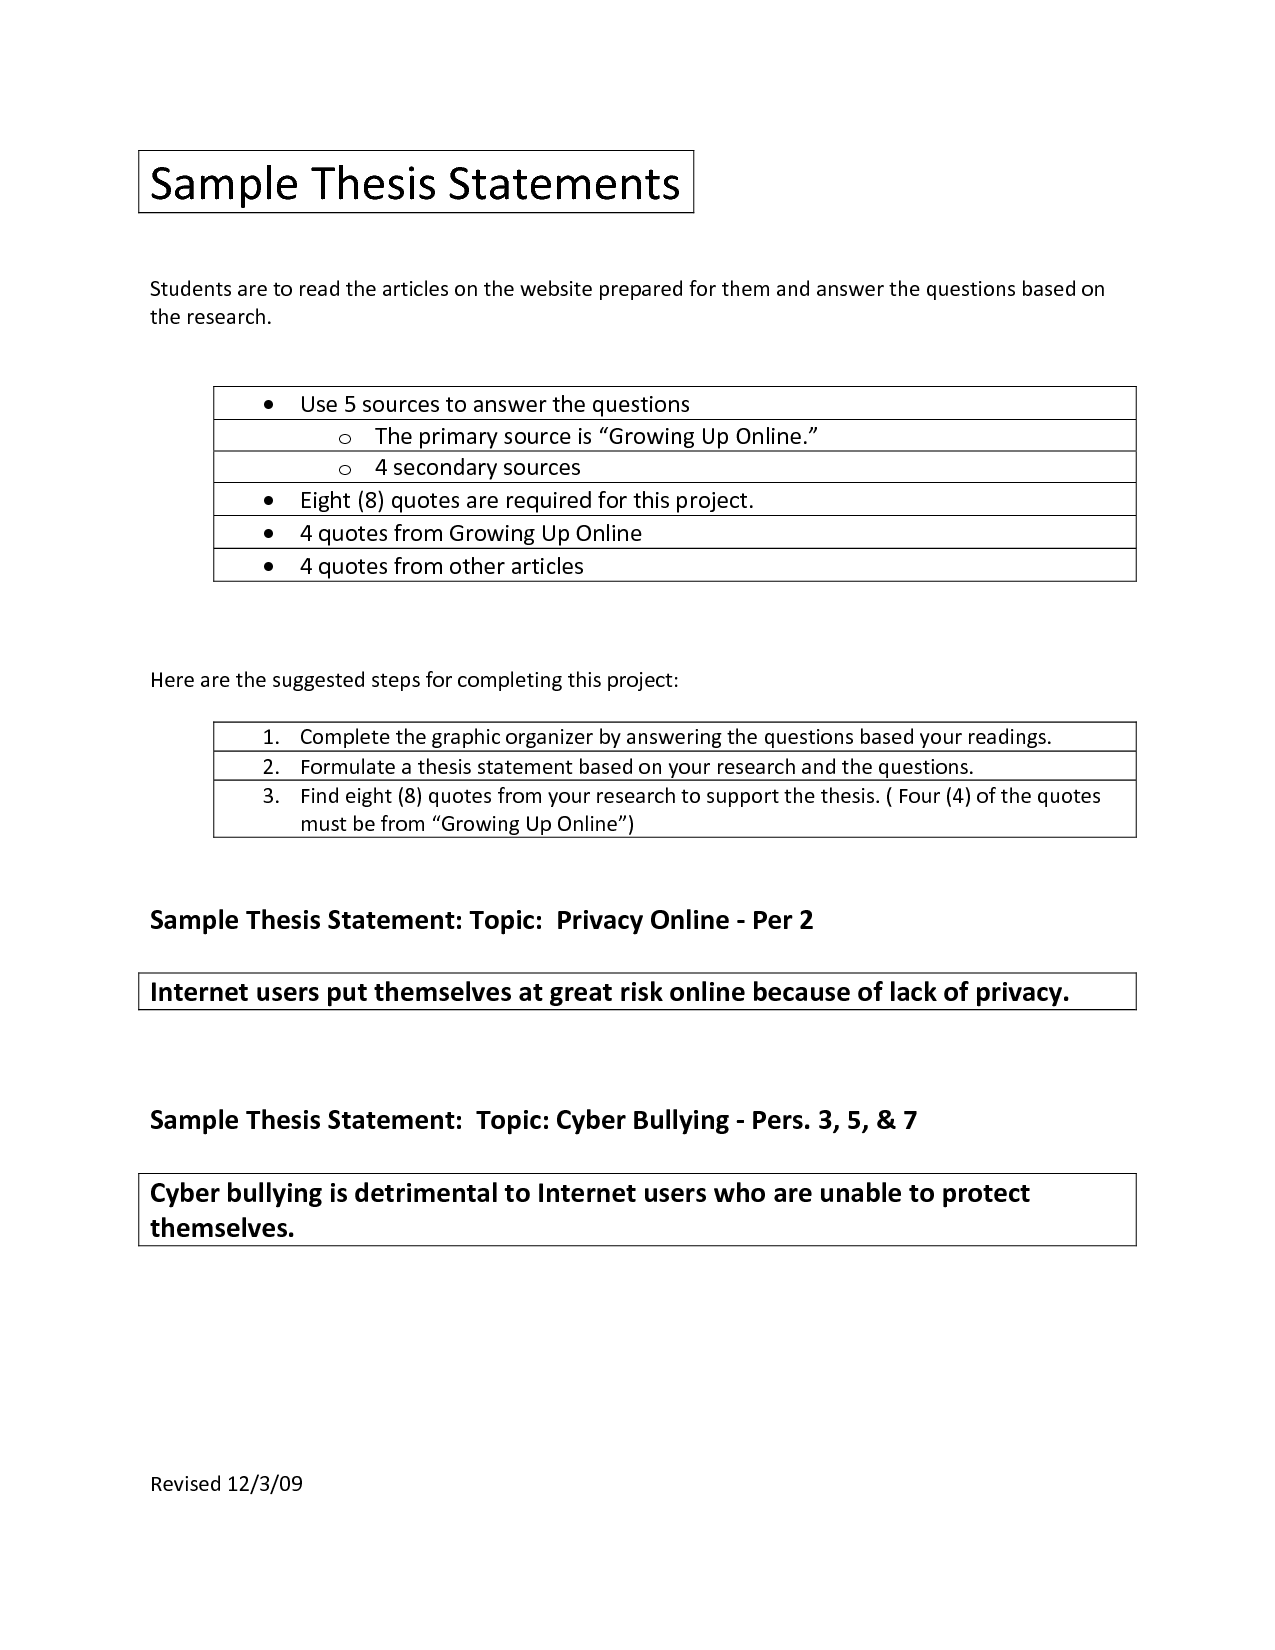 Dissertation research methodology questionnaire